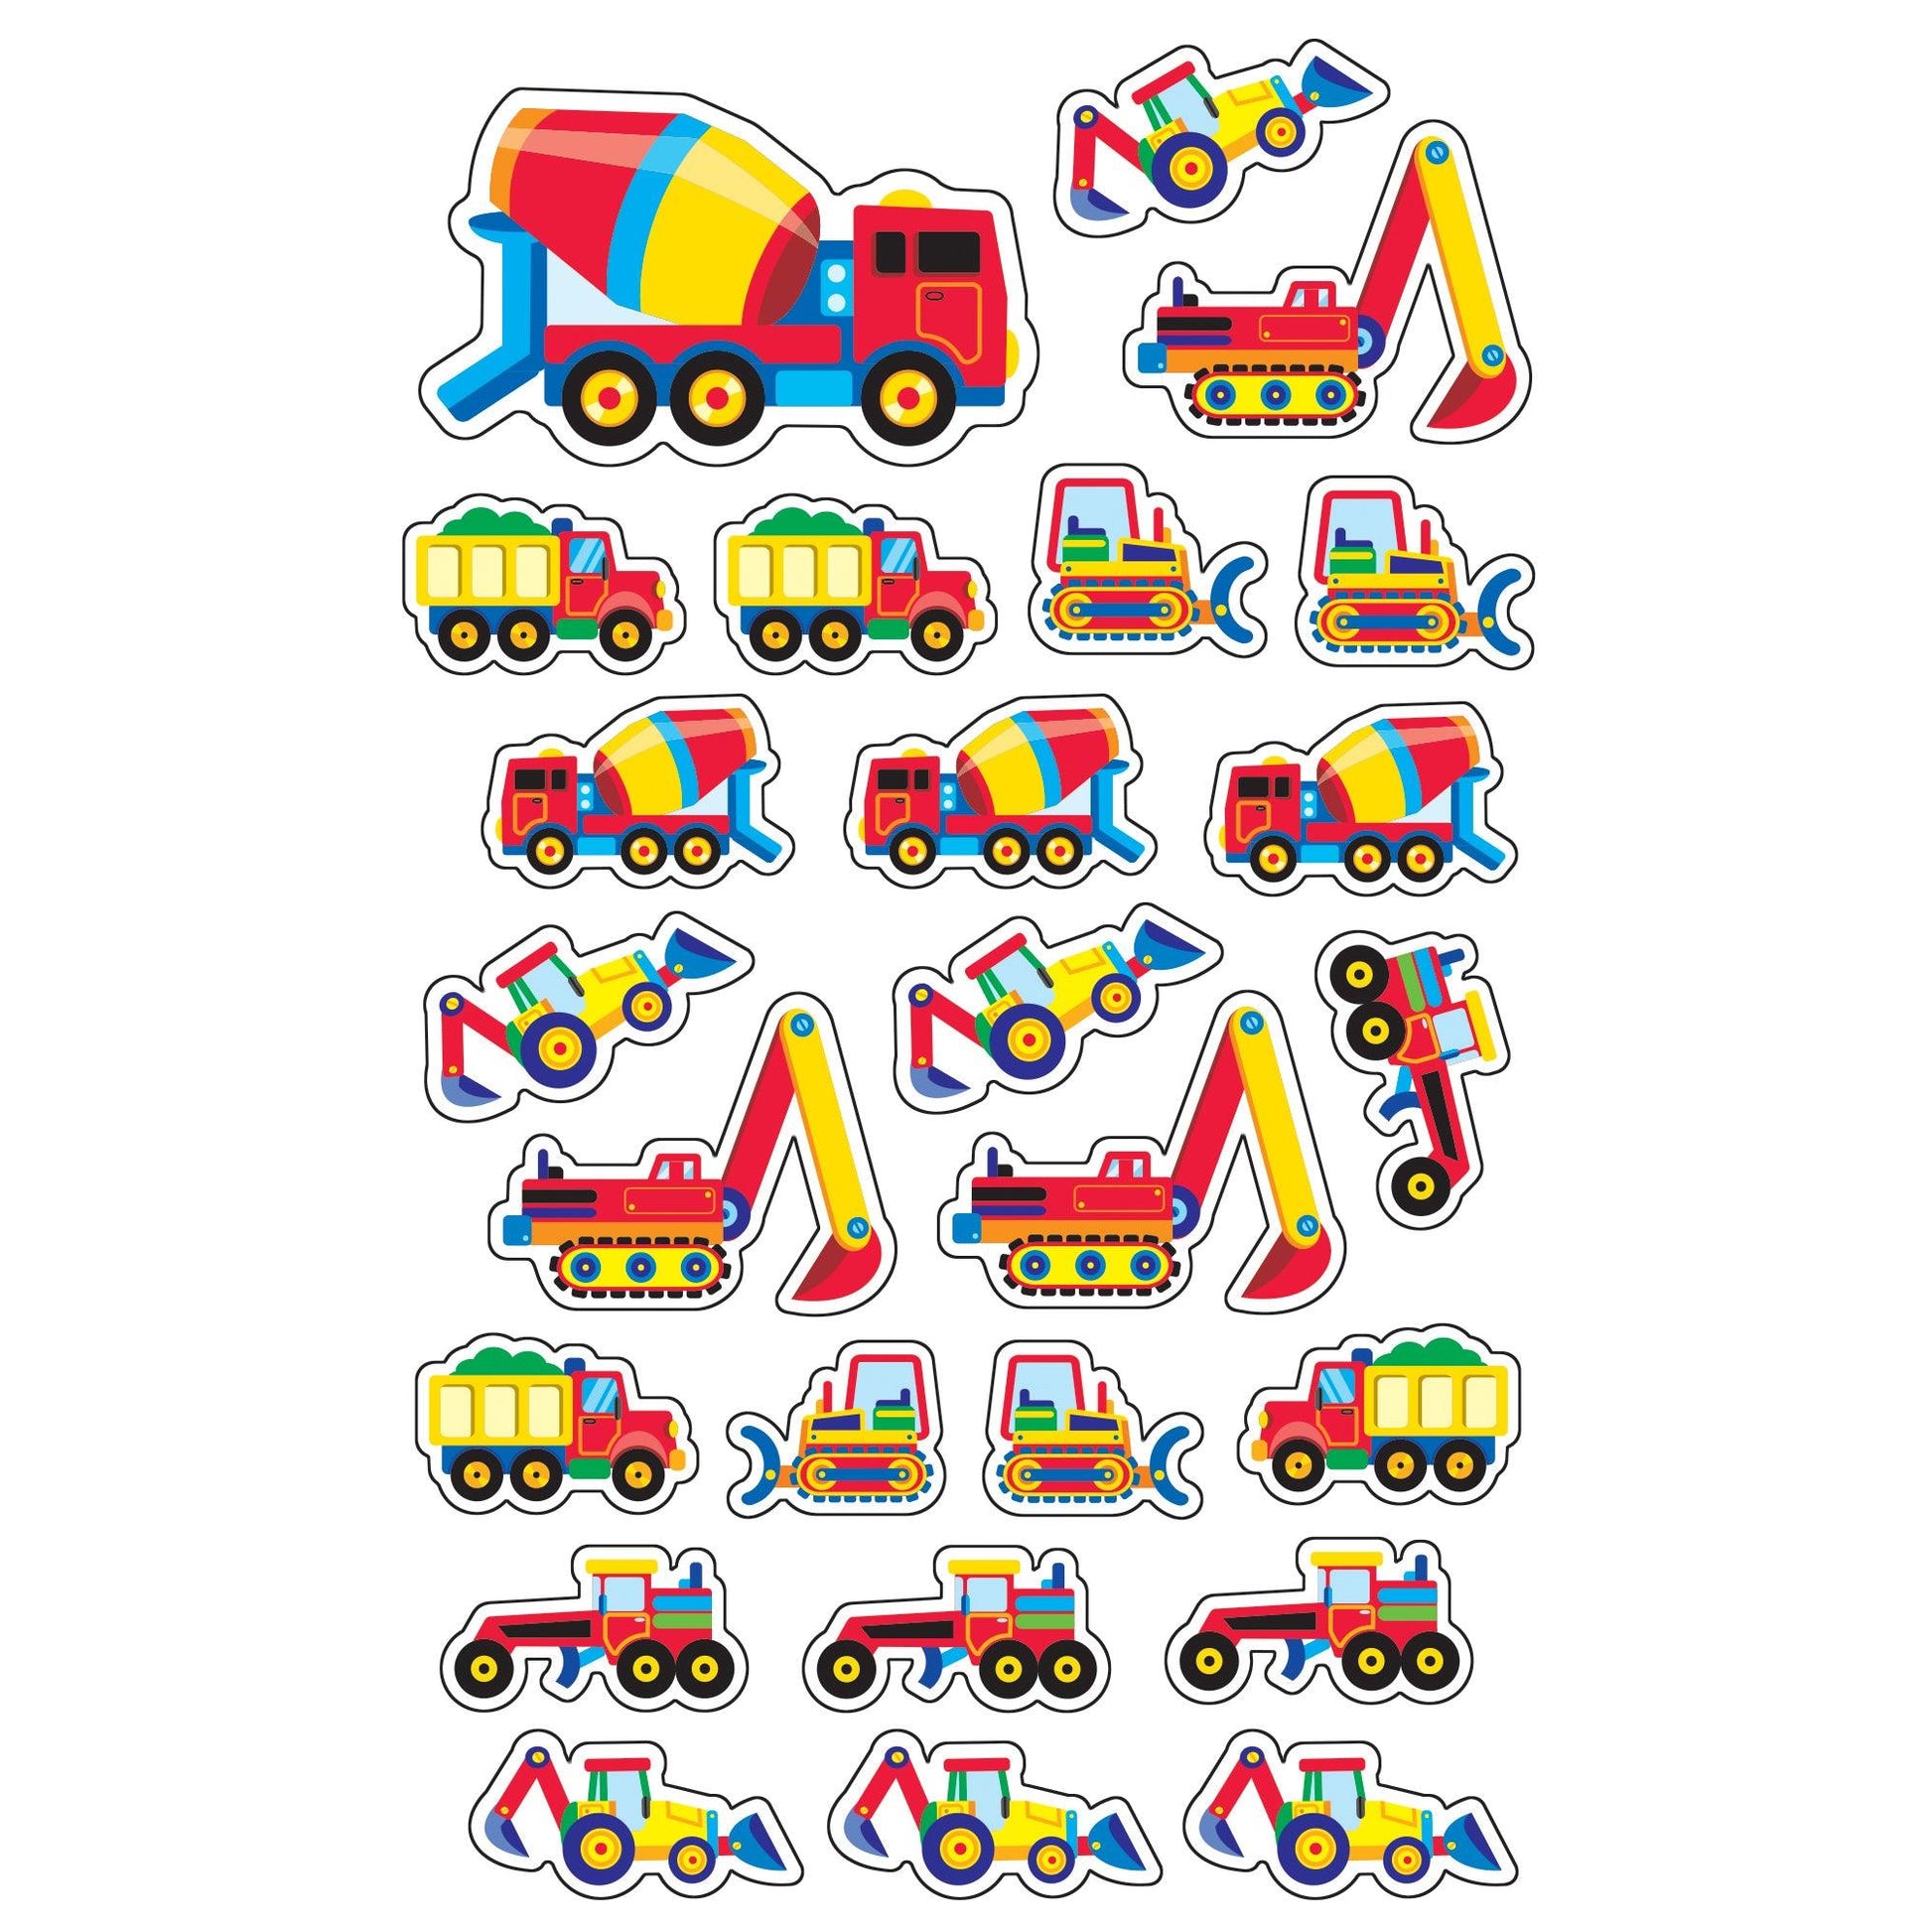 Construction Vehicles superShapes Stickers-Large, 200 Per Pack, 6 Packs - Loomini